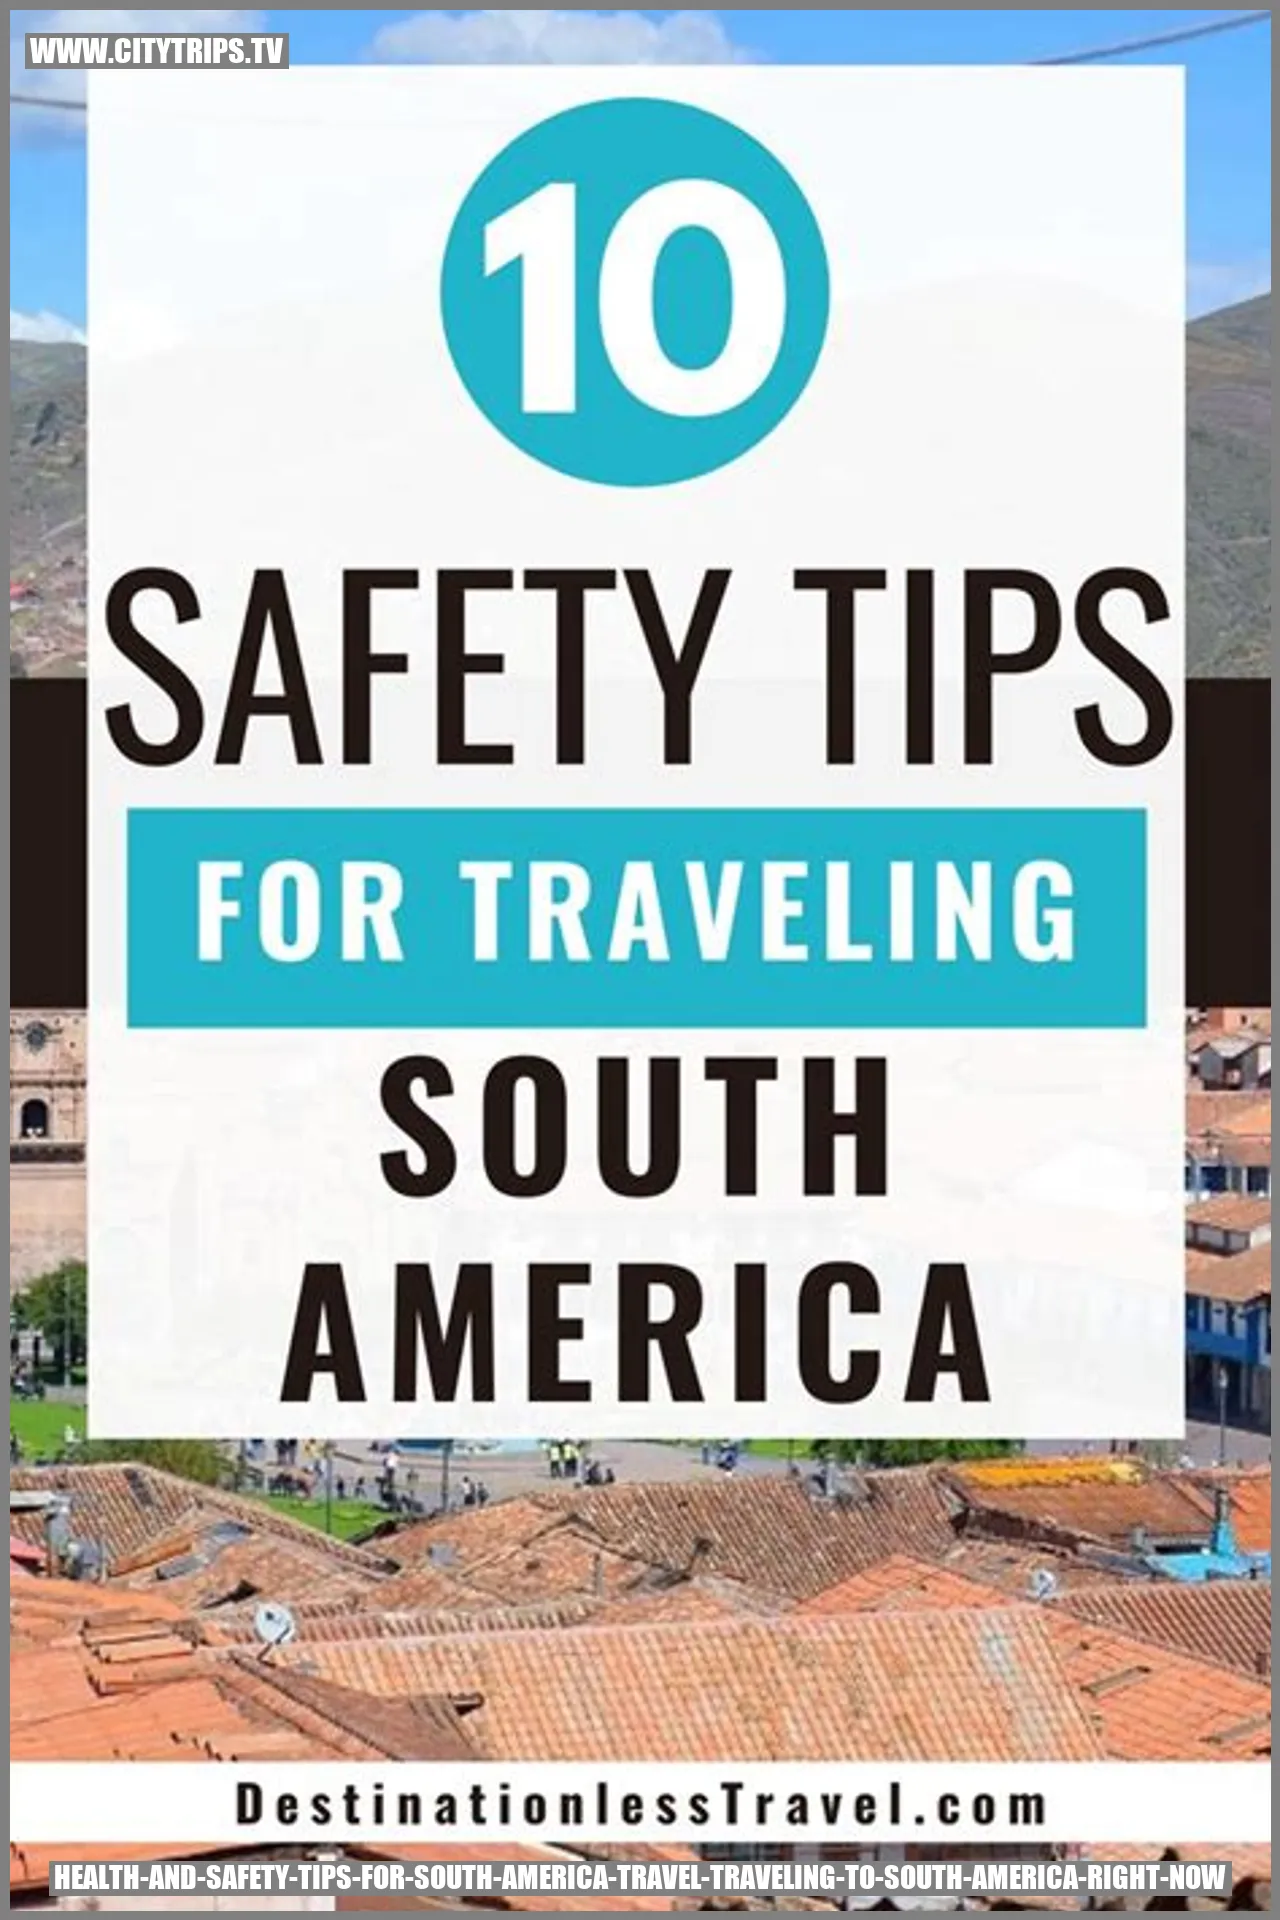 Health and Safety Tips for South America Travel